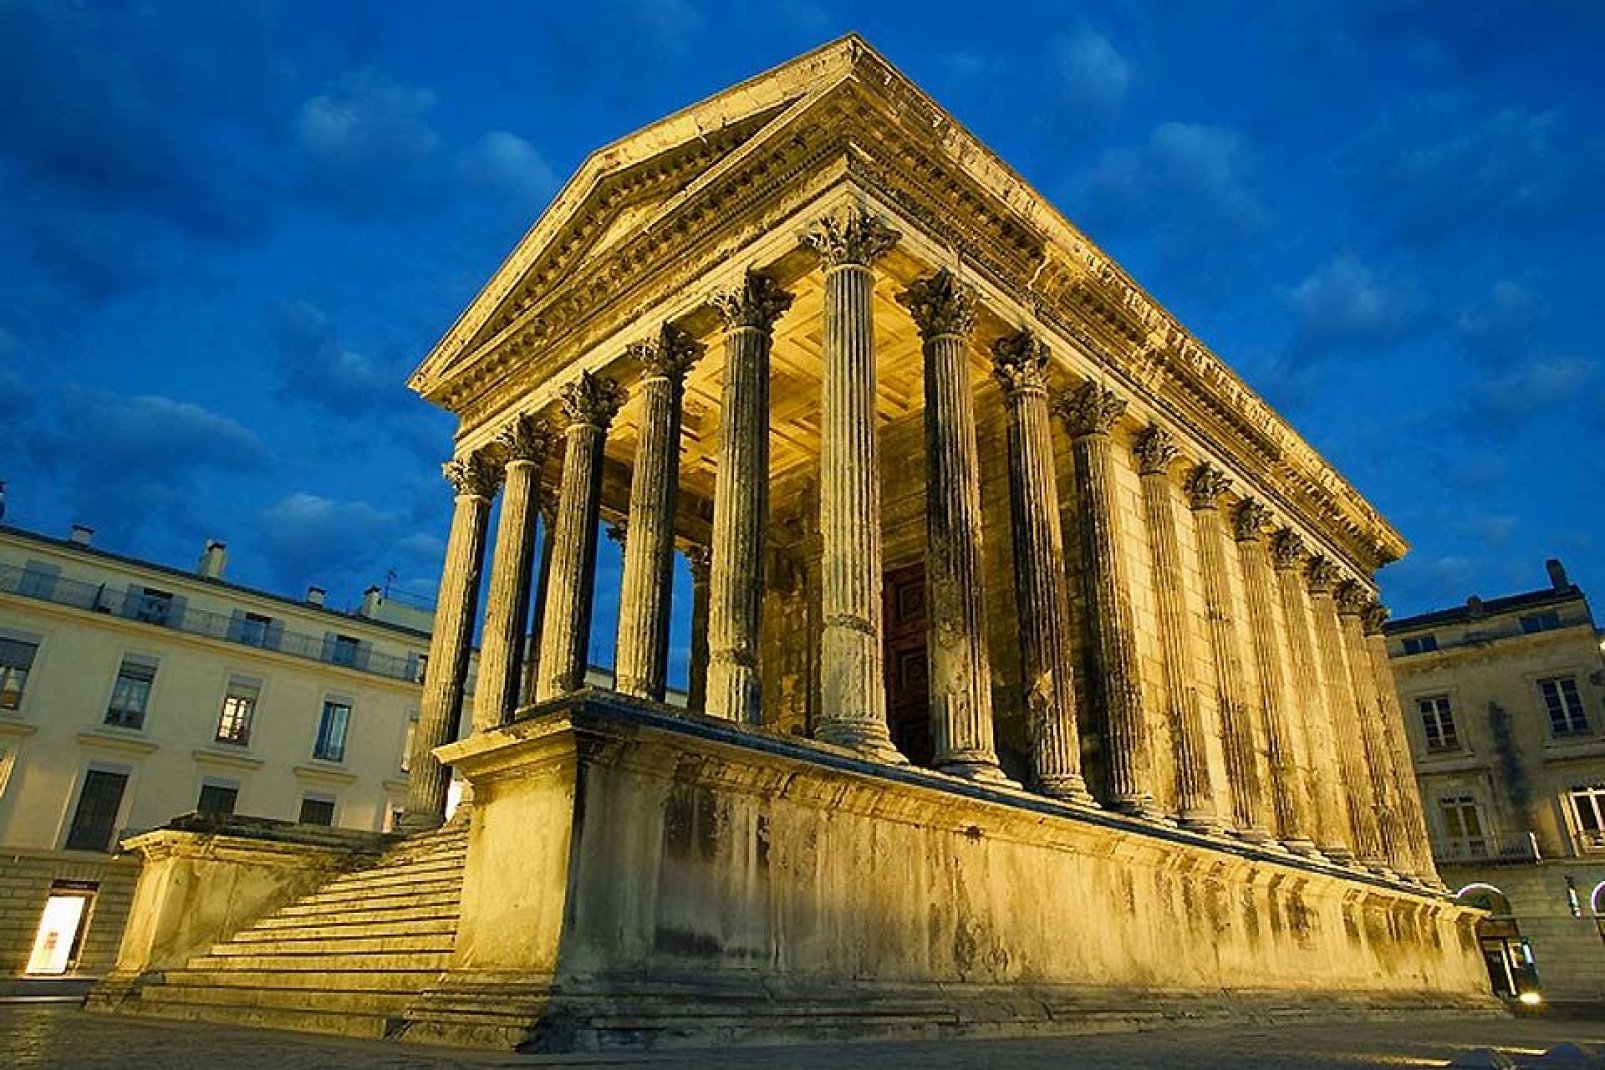 Maison Carrée is the only Roman temple in the world that has been entirely preserved. The 20-minute 3D film 'Héros de Nîmes', is shown on a giant screen here.